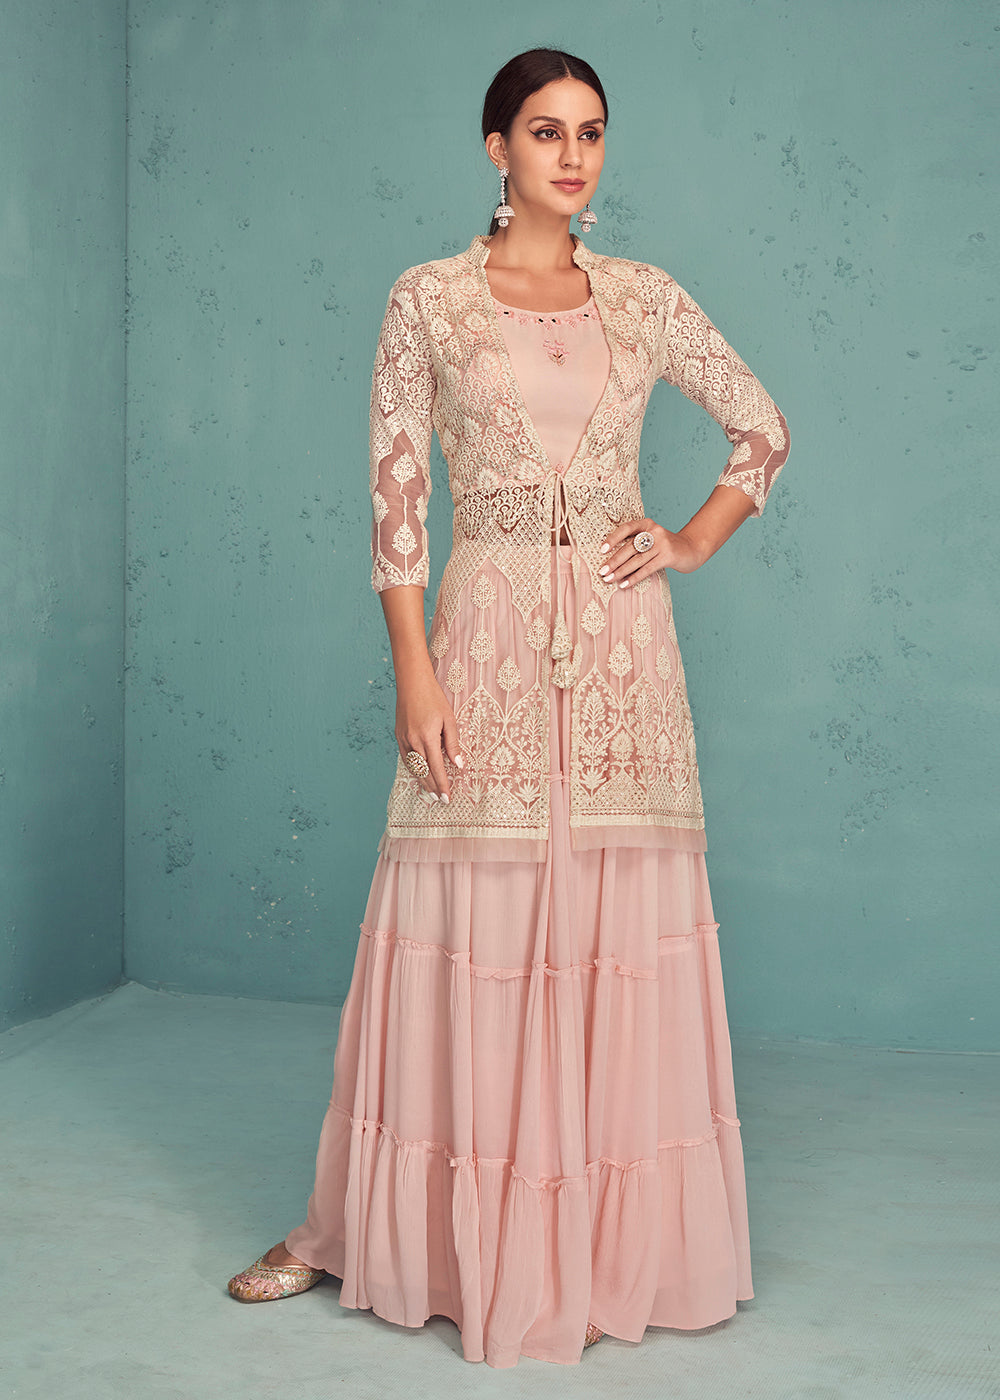 Shop Now Soft Peach Indo-Western Jacket Style Georgette Skirt Dress Online in USA, UK, Canada & Worldwide at Empress Clothing.